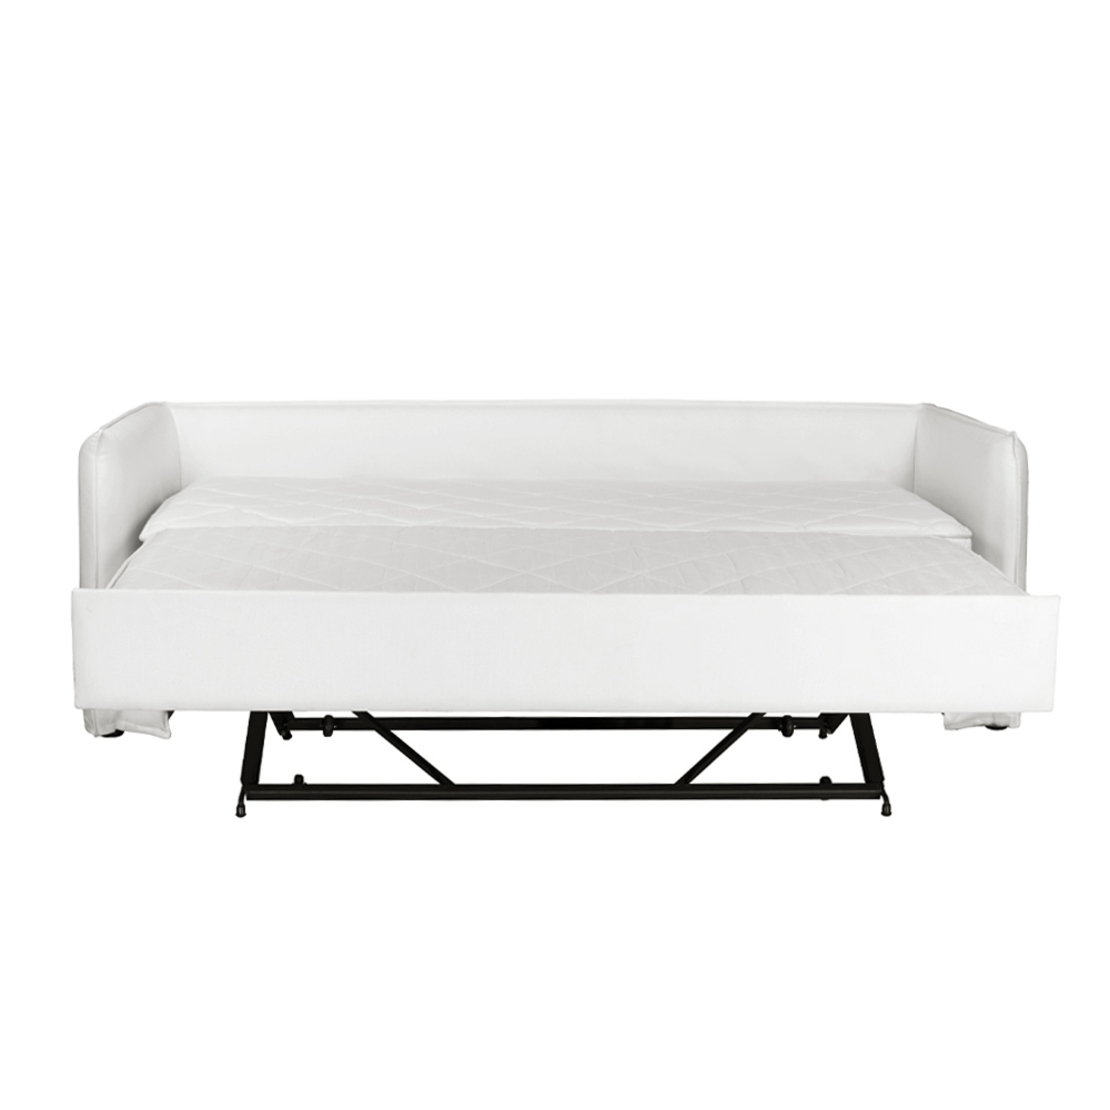 ISLAND SOFA 3SEAT REMOVABLE COVER WITH MECHANISM A